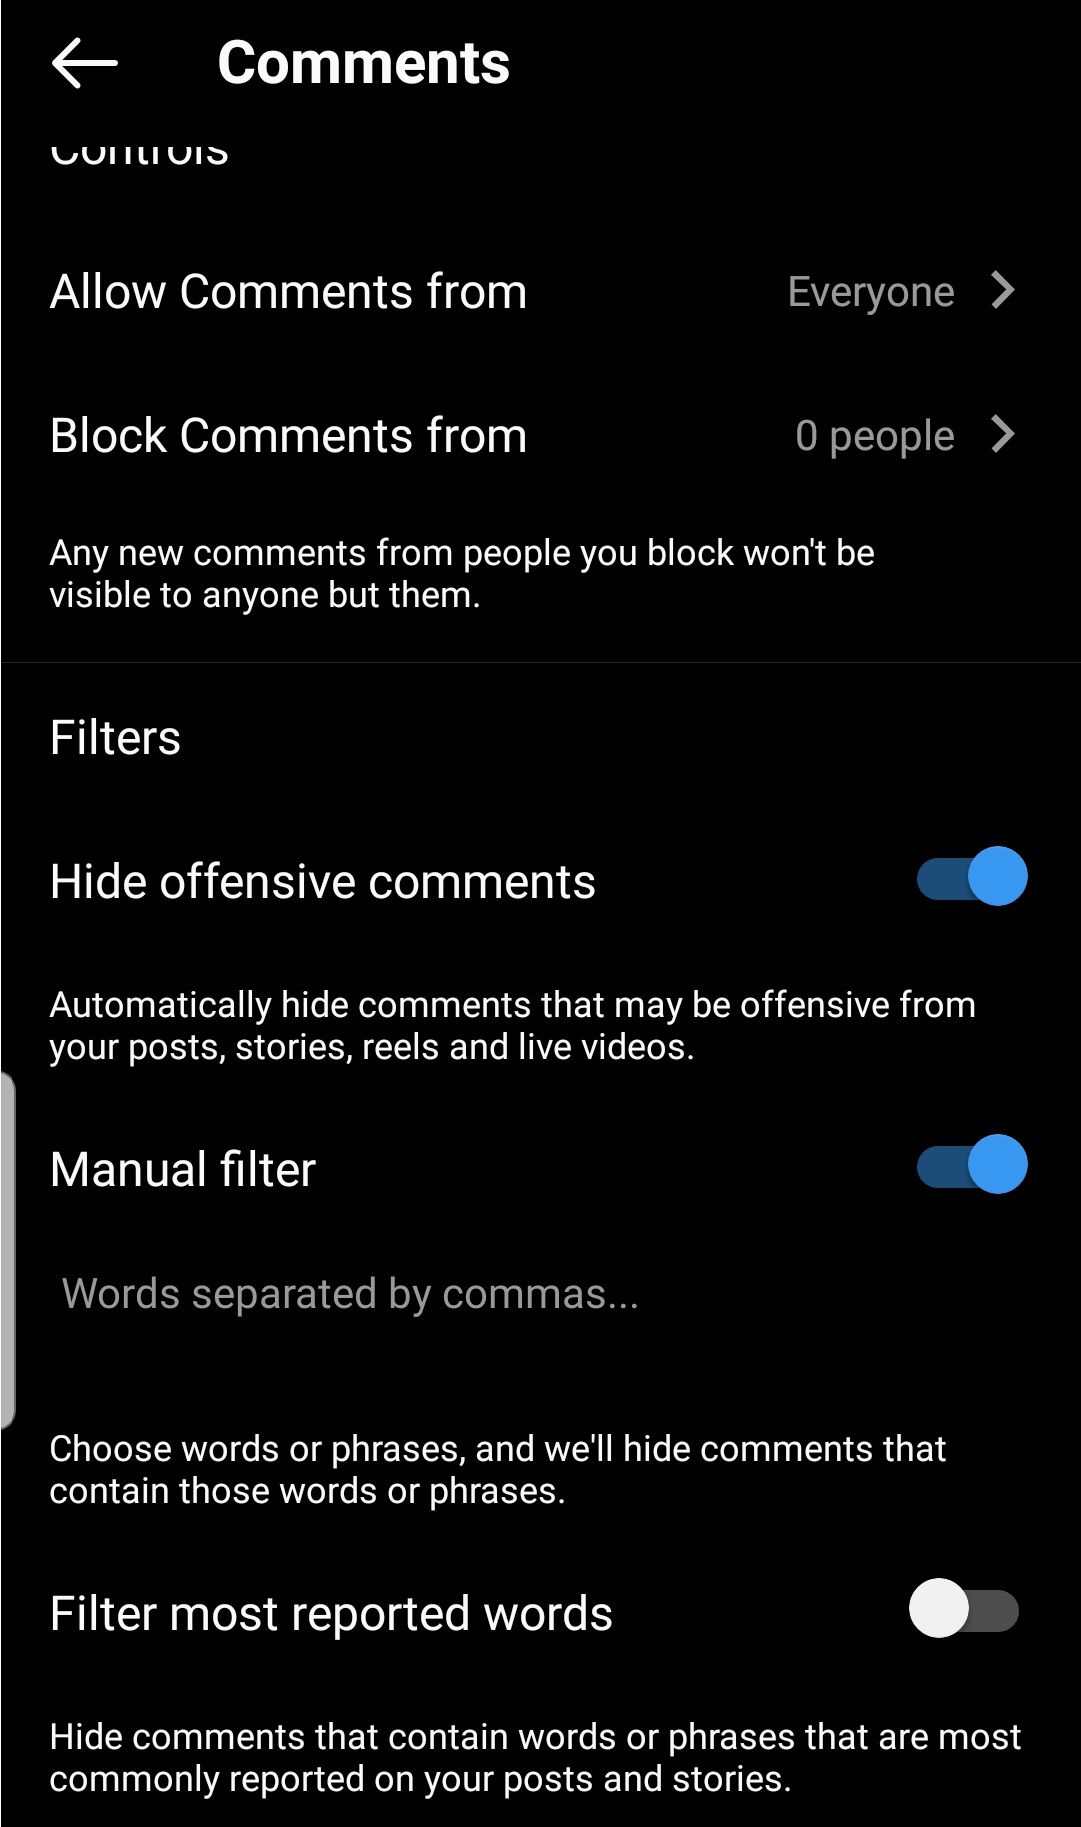 How to delete a comment on Instagram